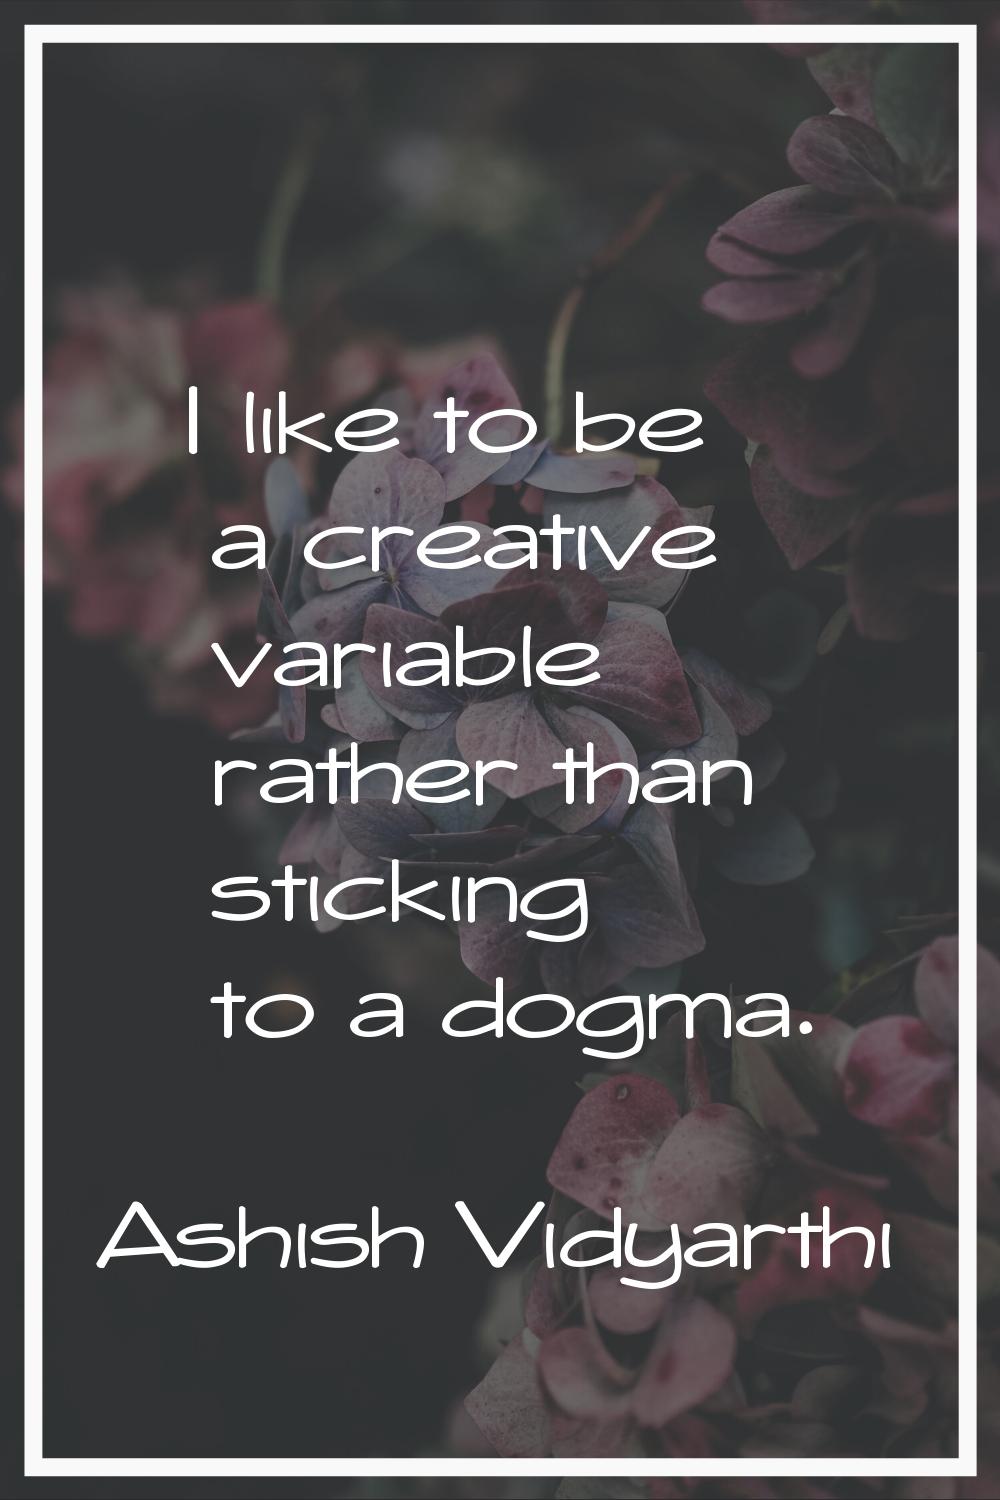 I like to be a creative variable rather than sticking to a dogma.